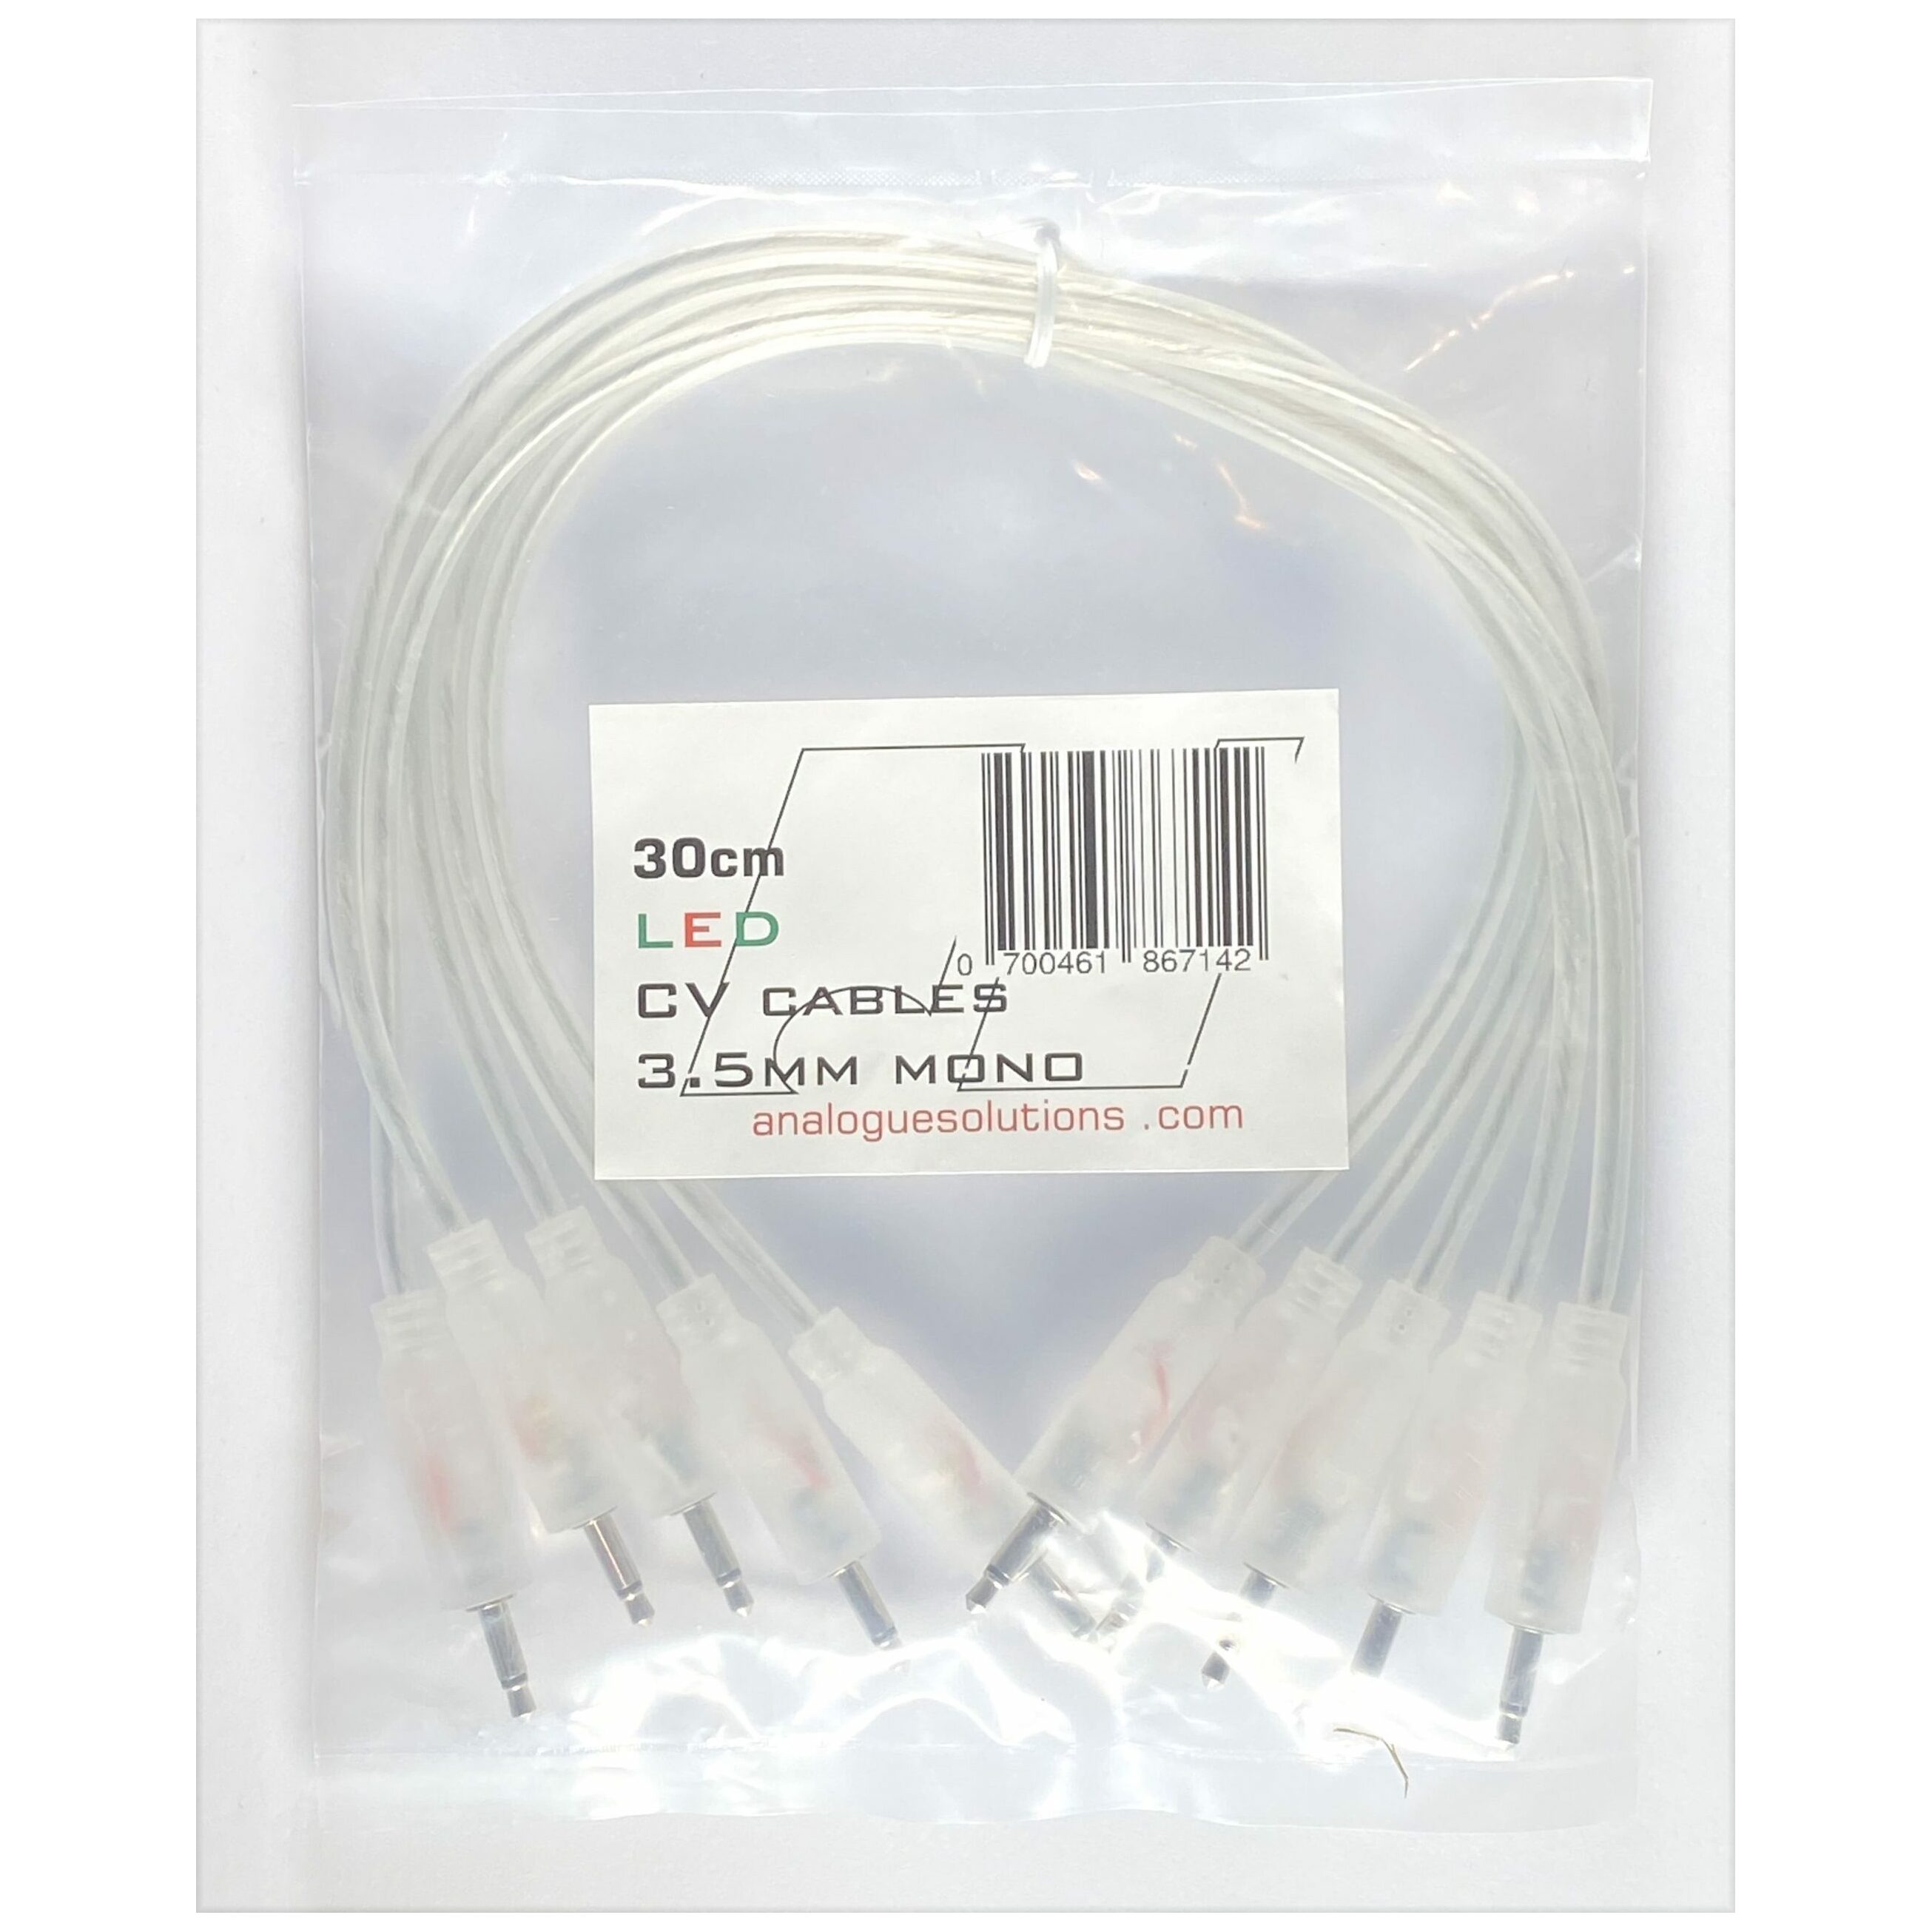 Analogue Solutions LED CV cable x5 30cm